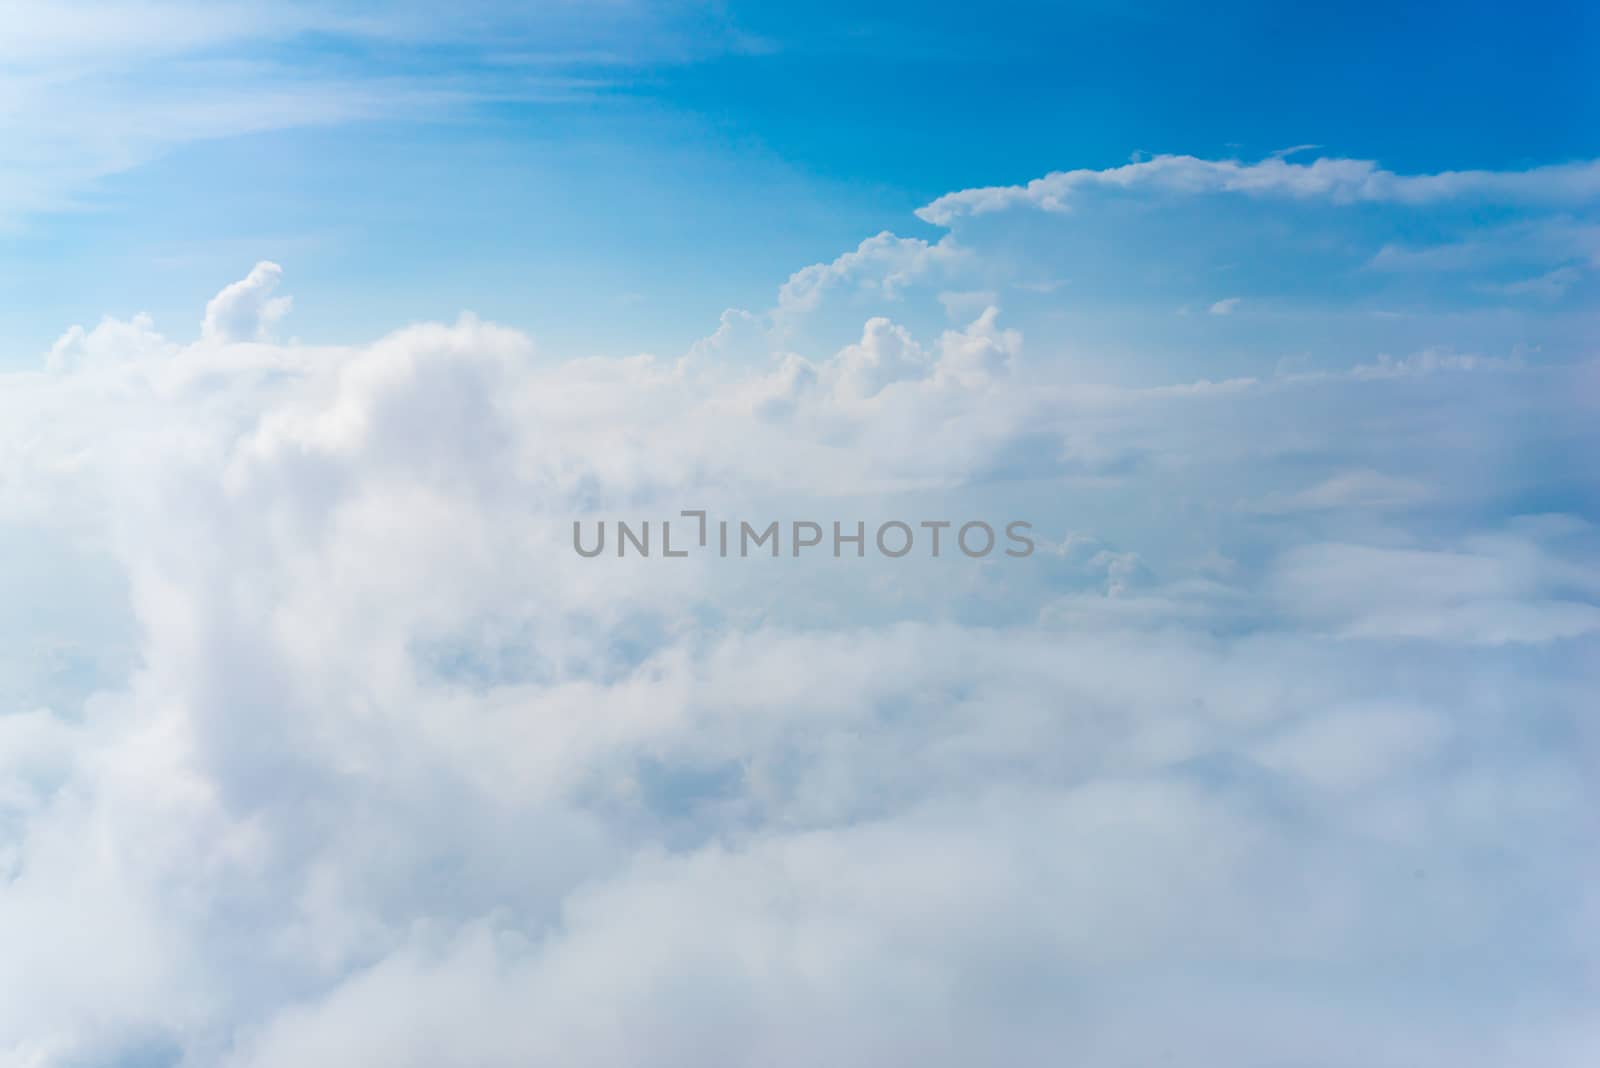 The View from the plane above the cloud and sky by iamway